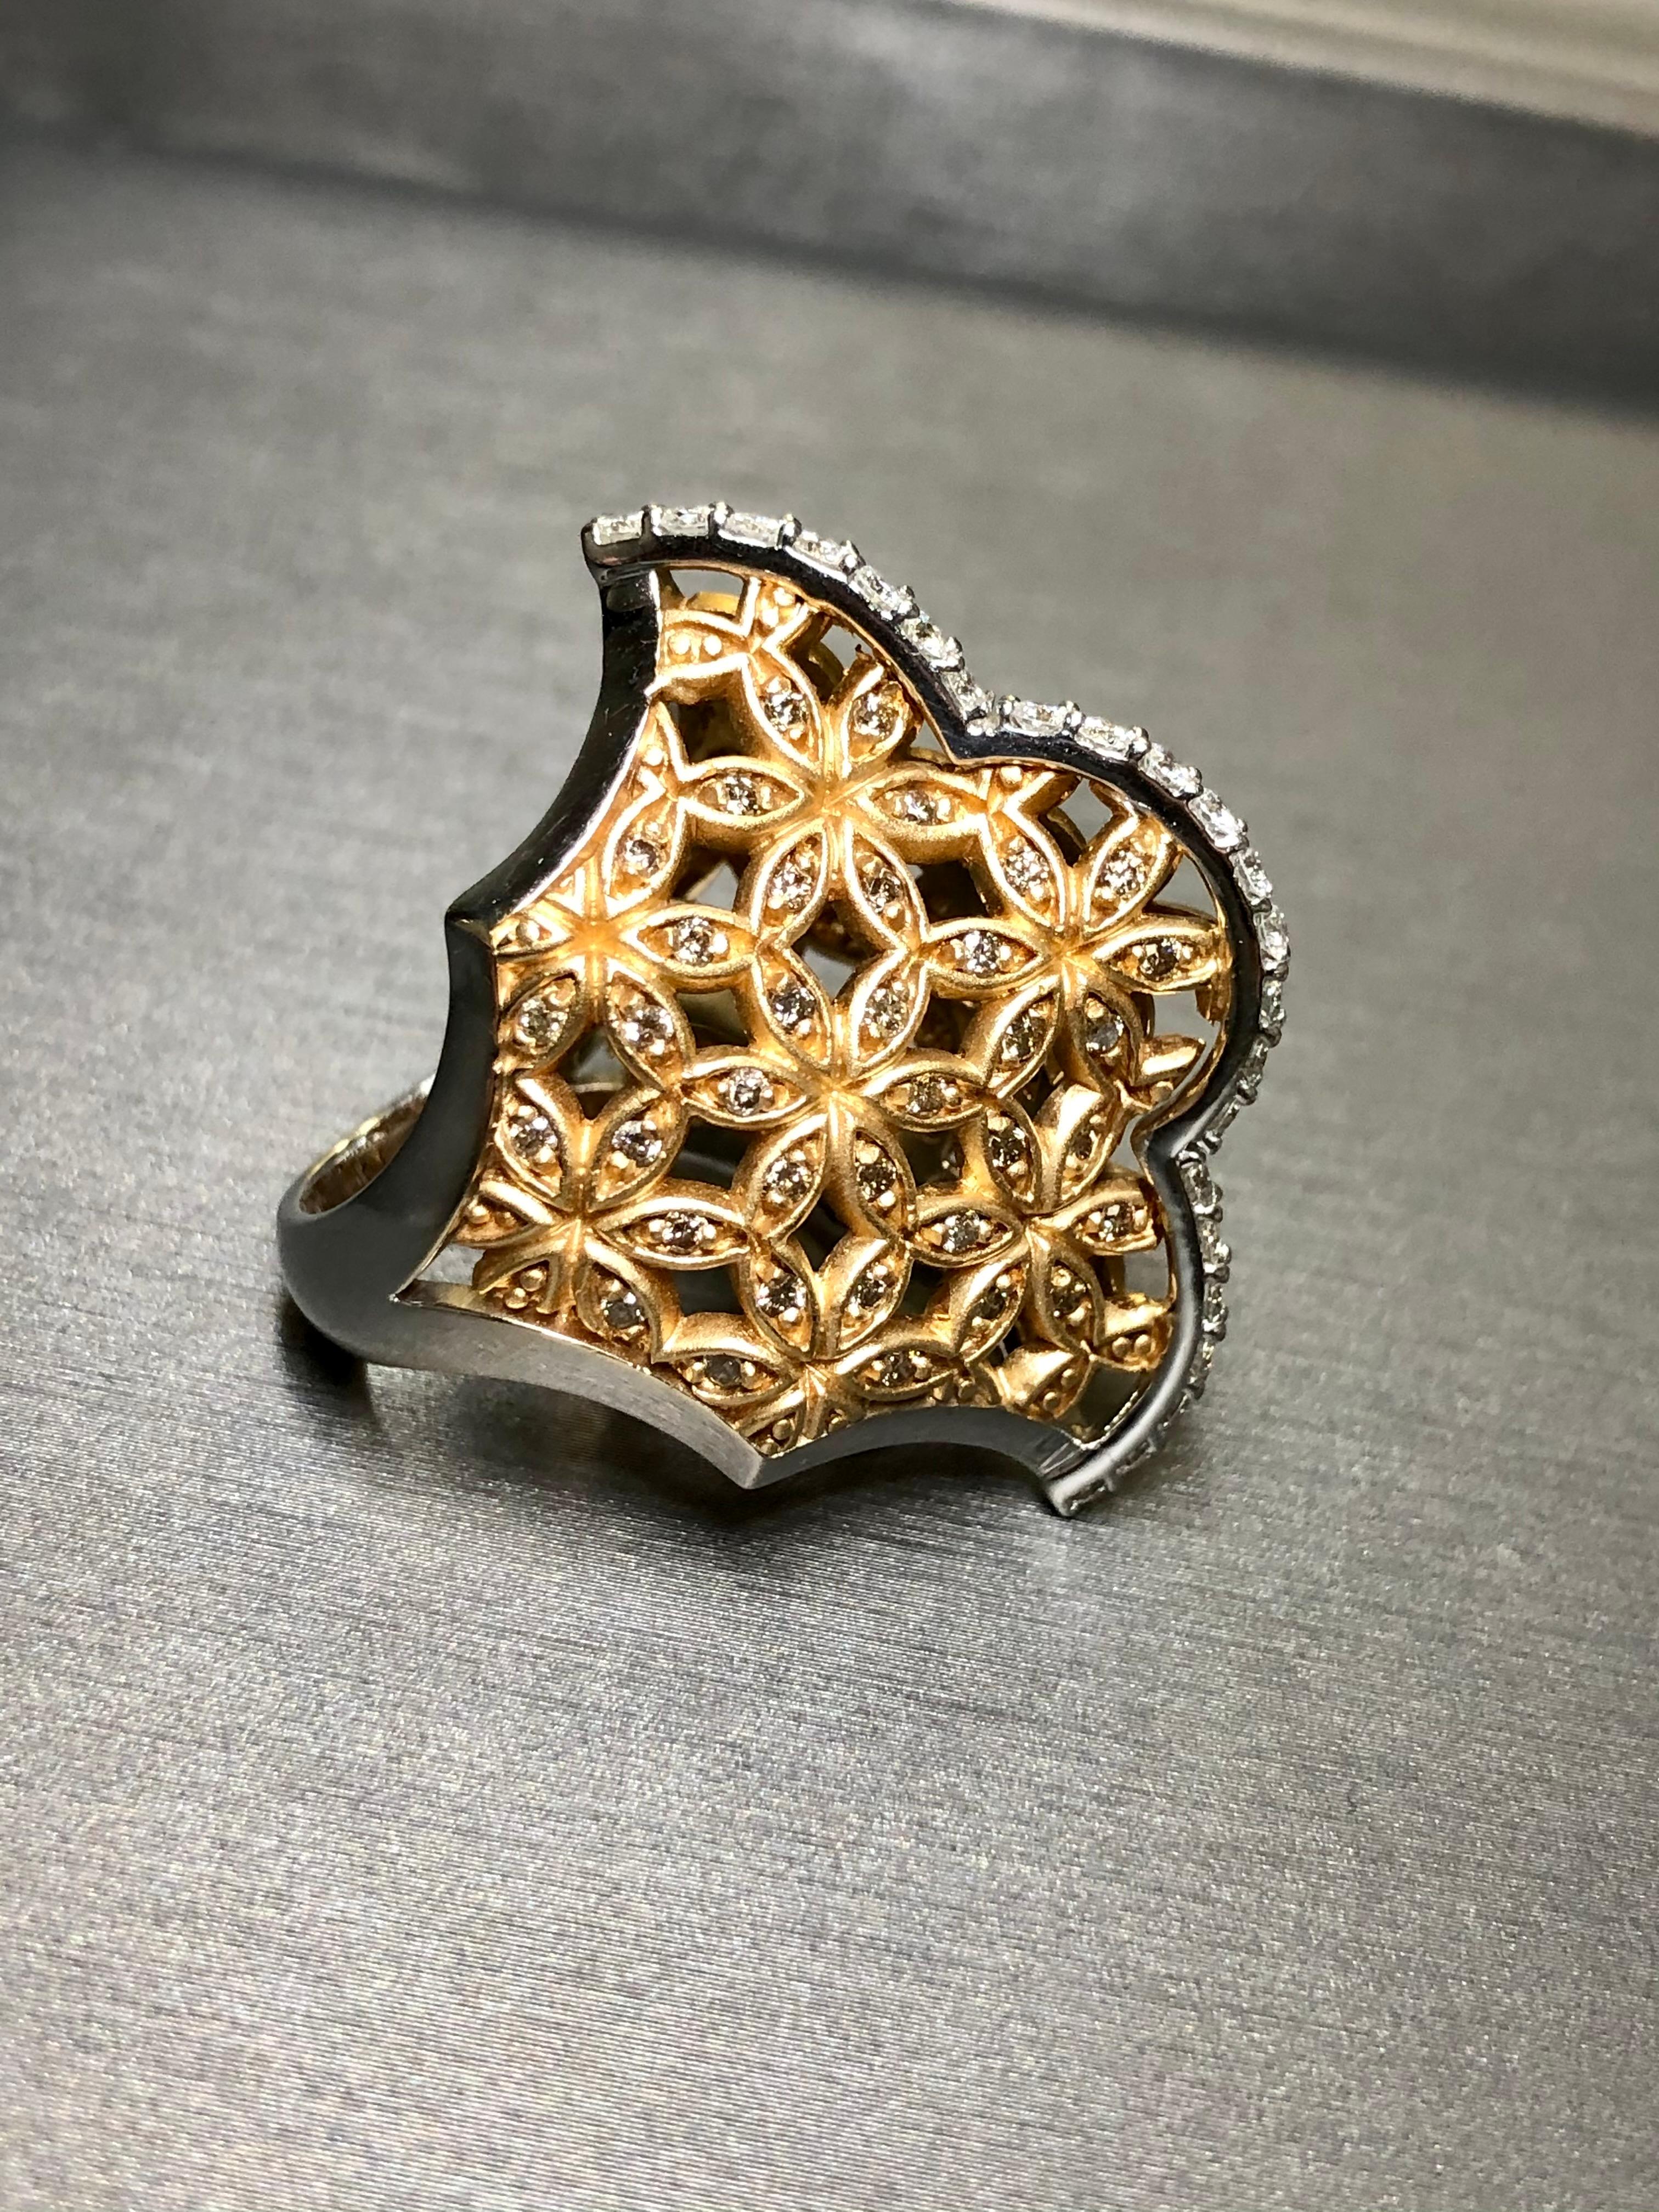 18K ARMAGGAN White Rose Gold Diamond Floral Open Work Cocktail Ring Sz 7.5  For Sale 2